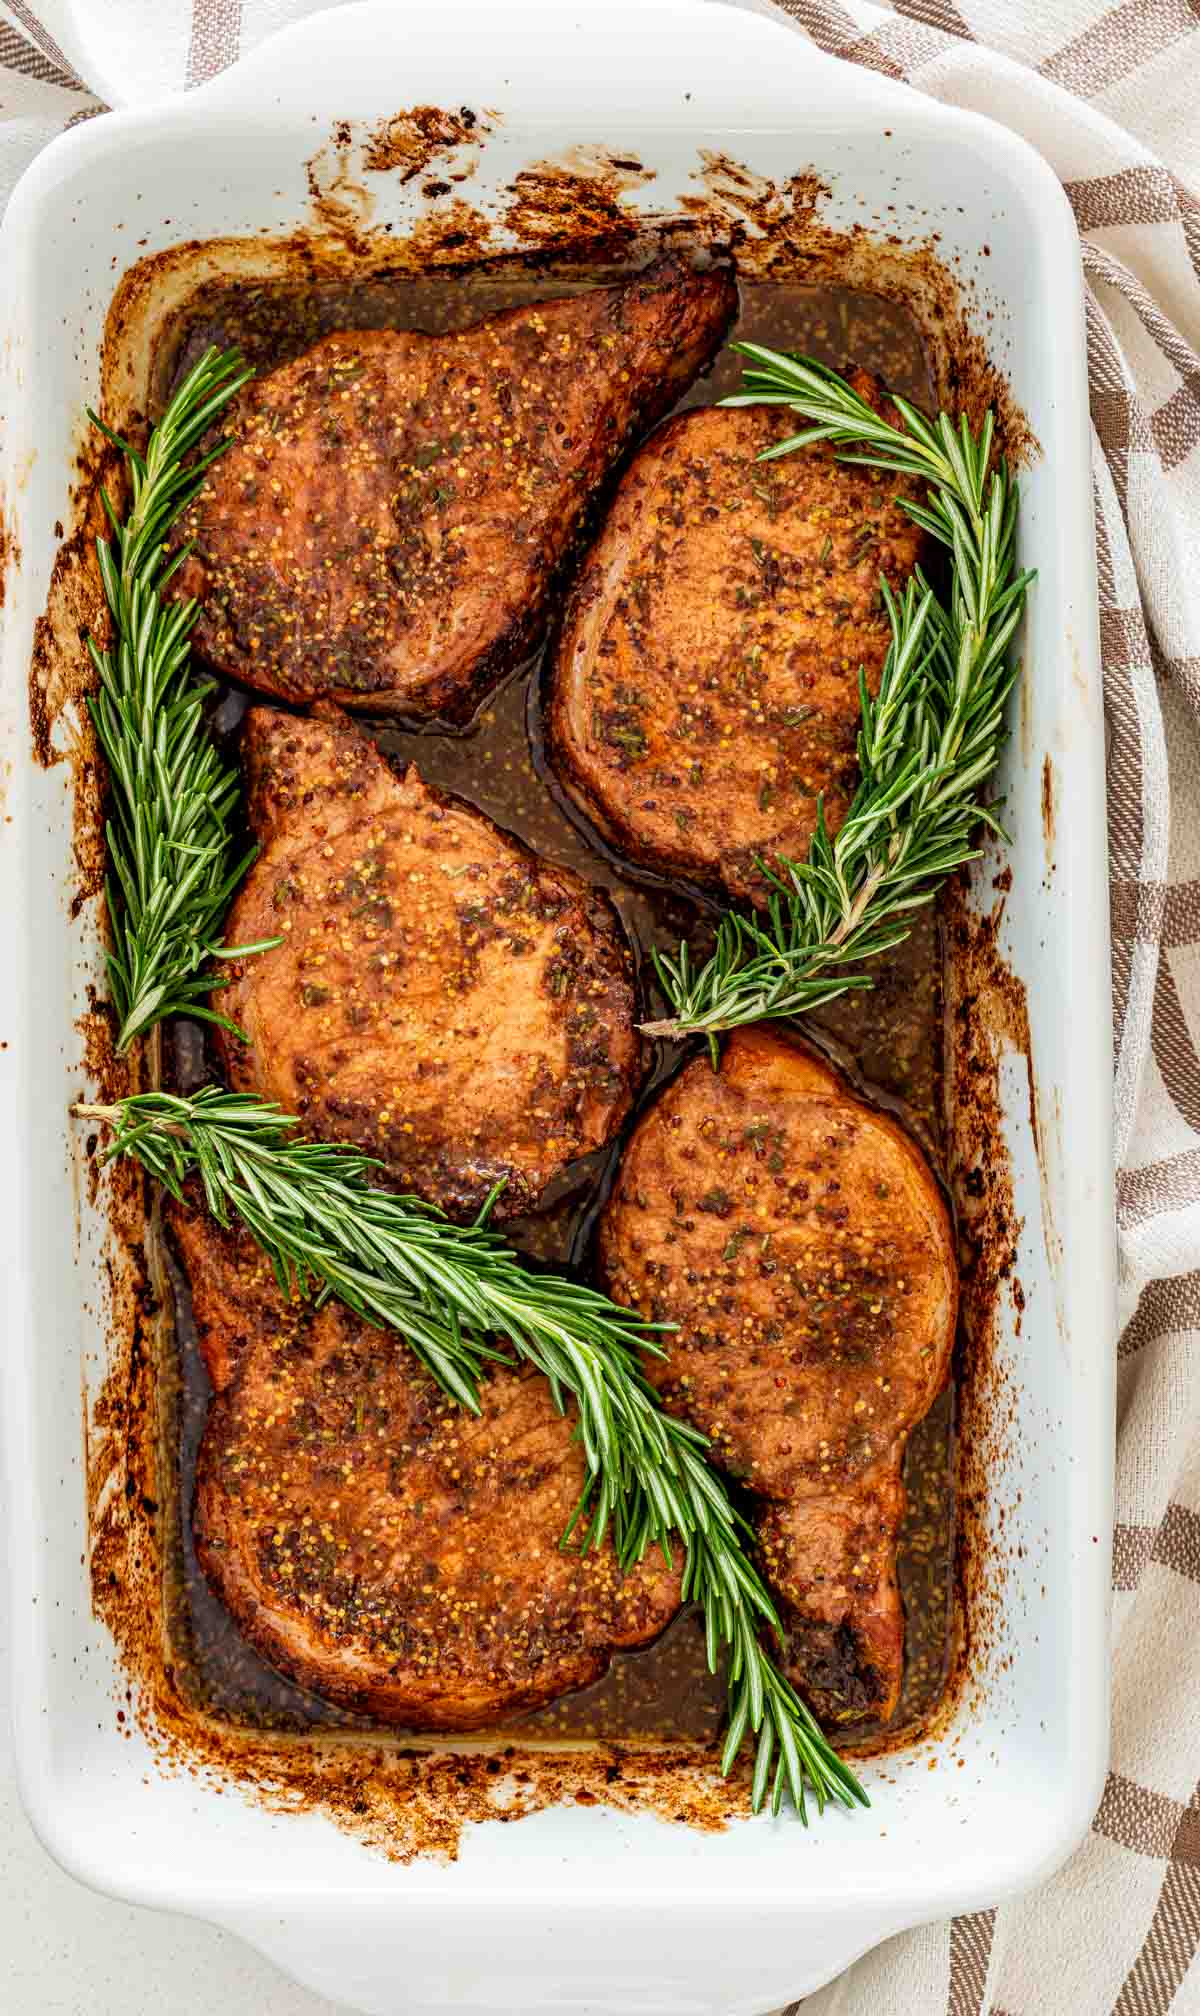 mustard balsamic pork chops in a white casserole dish garnished with rosemary.